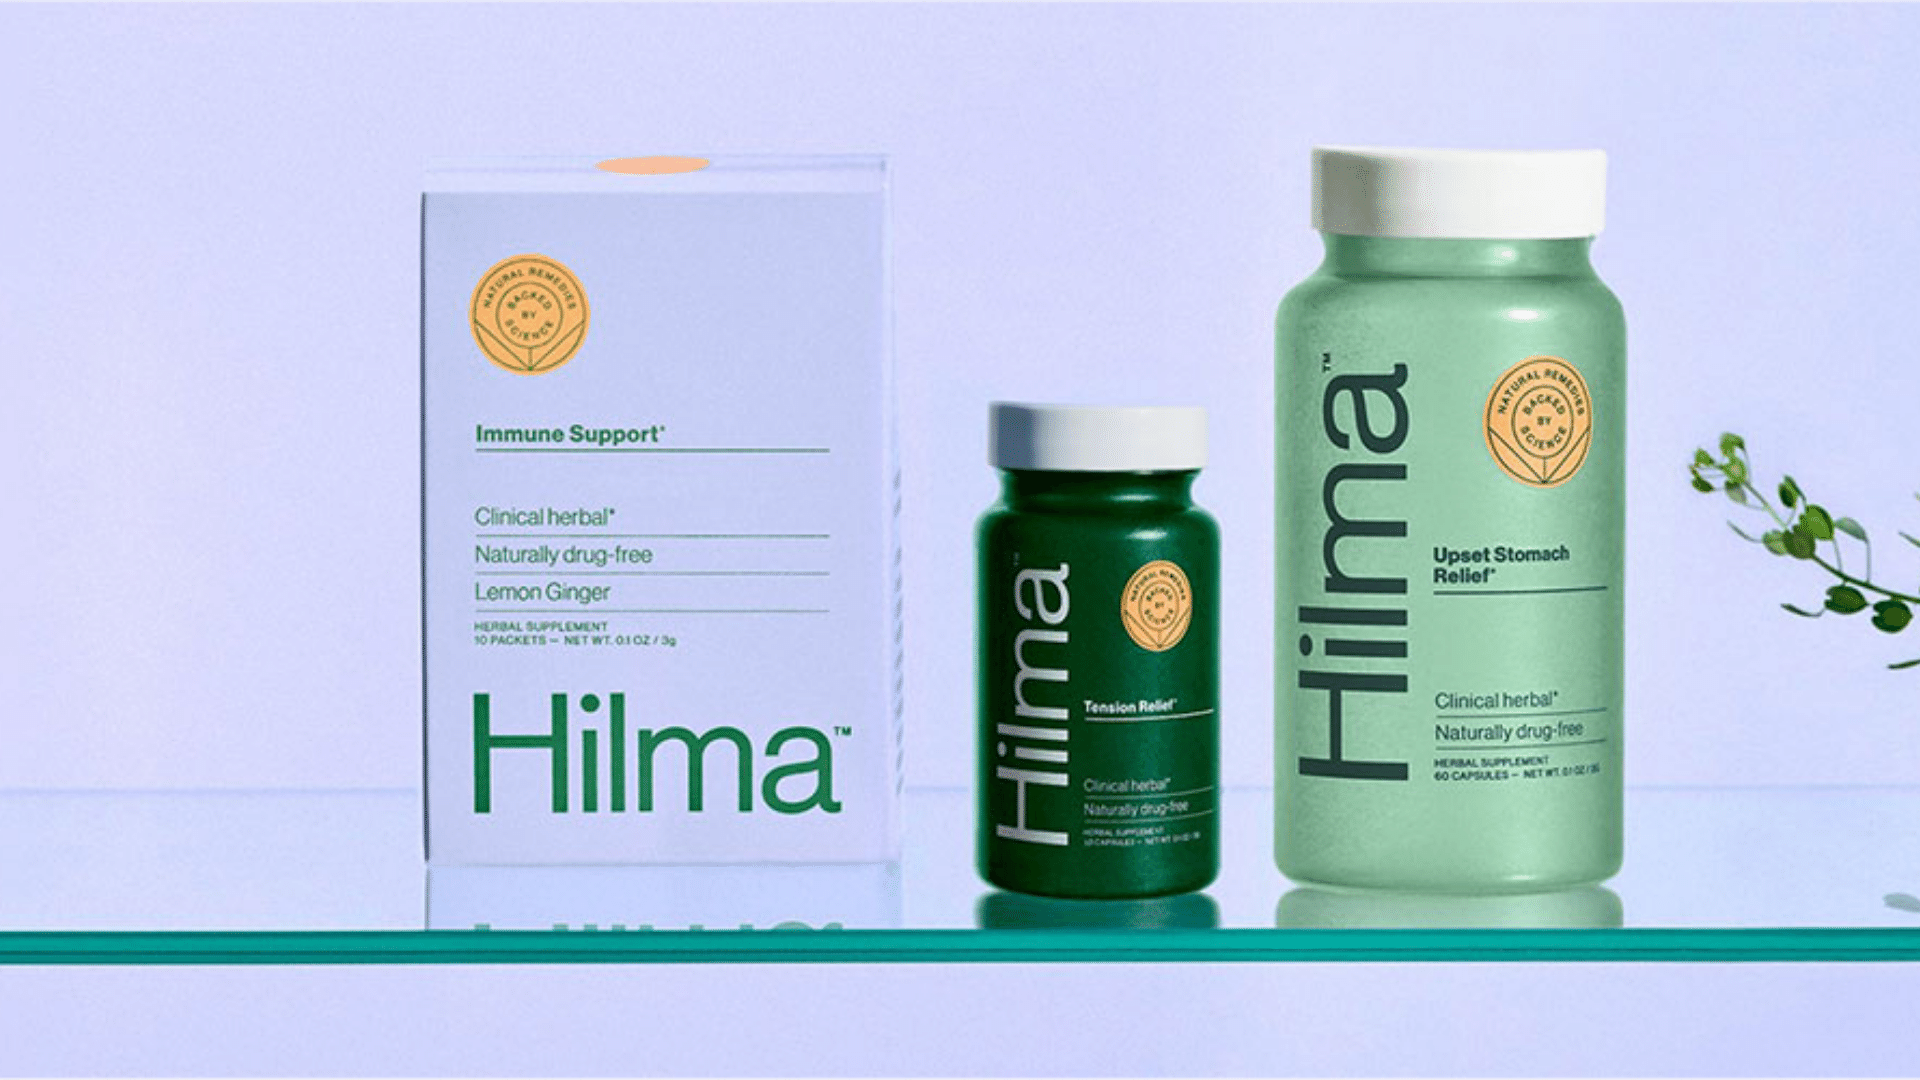 Brand identity and packaging for supplement, health brands